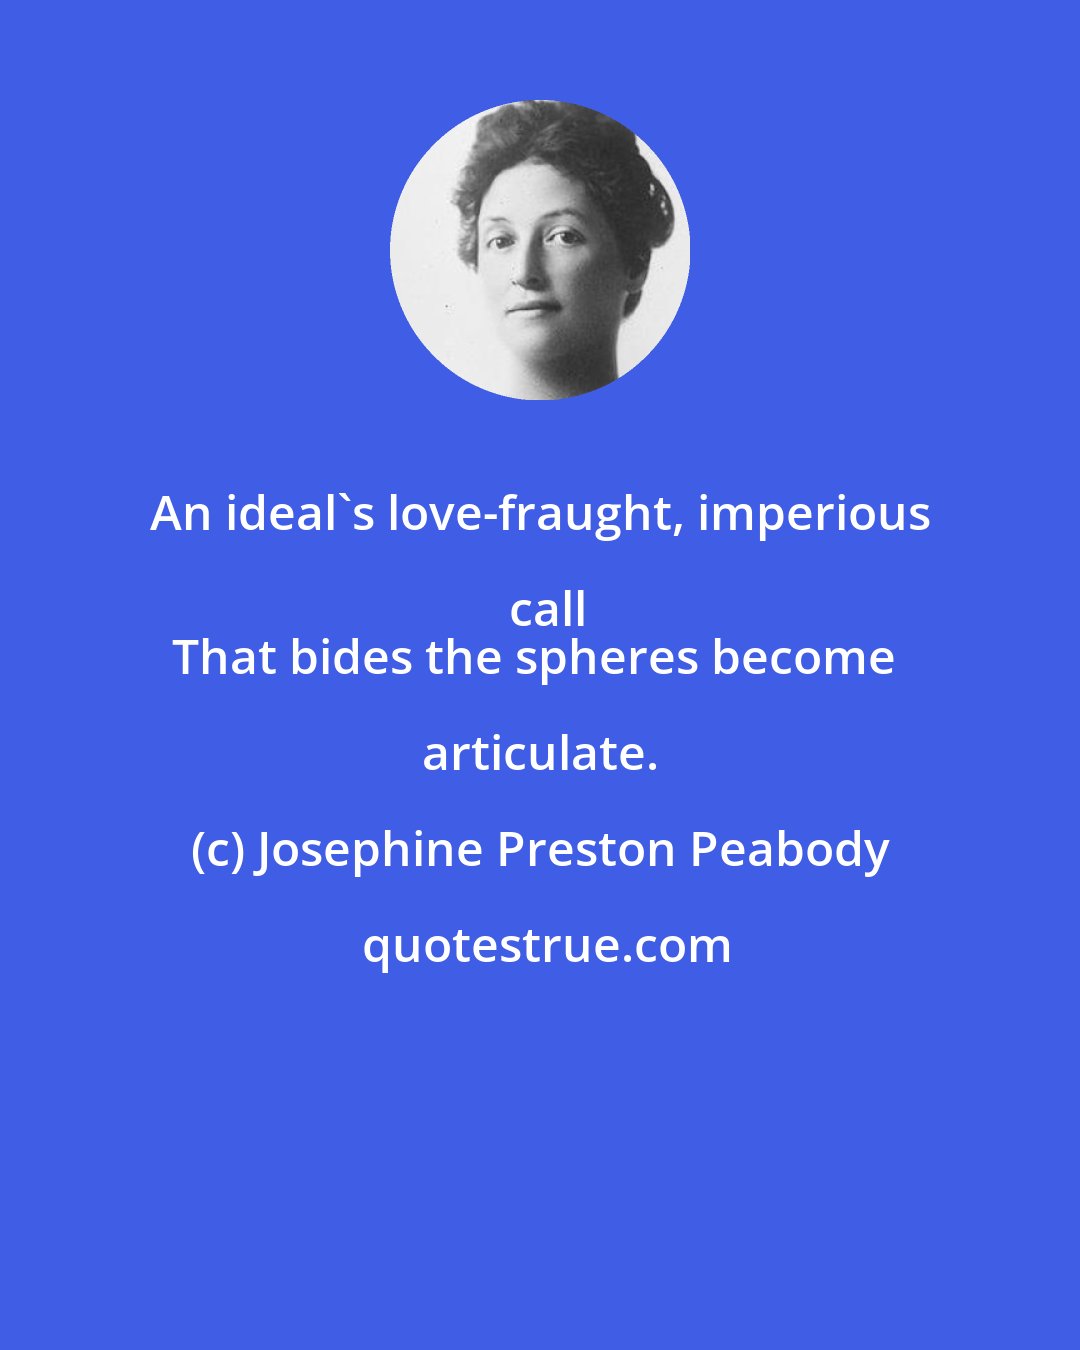 Josephine Preston Peabody: An ideal's love-fraught, imperious call
That bides the spheres become articulate.